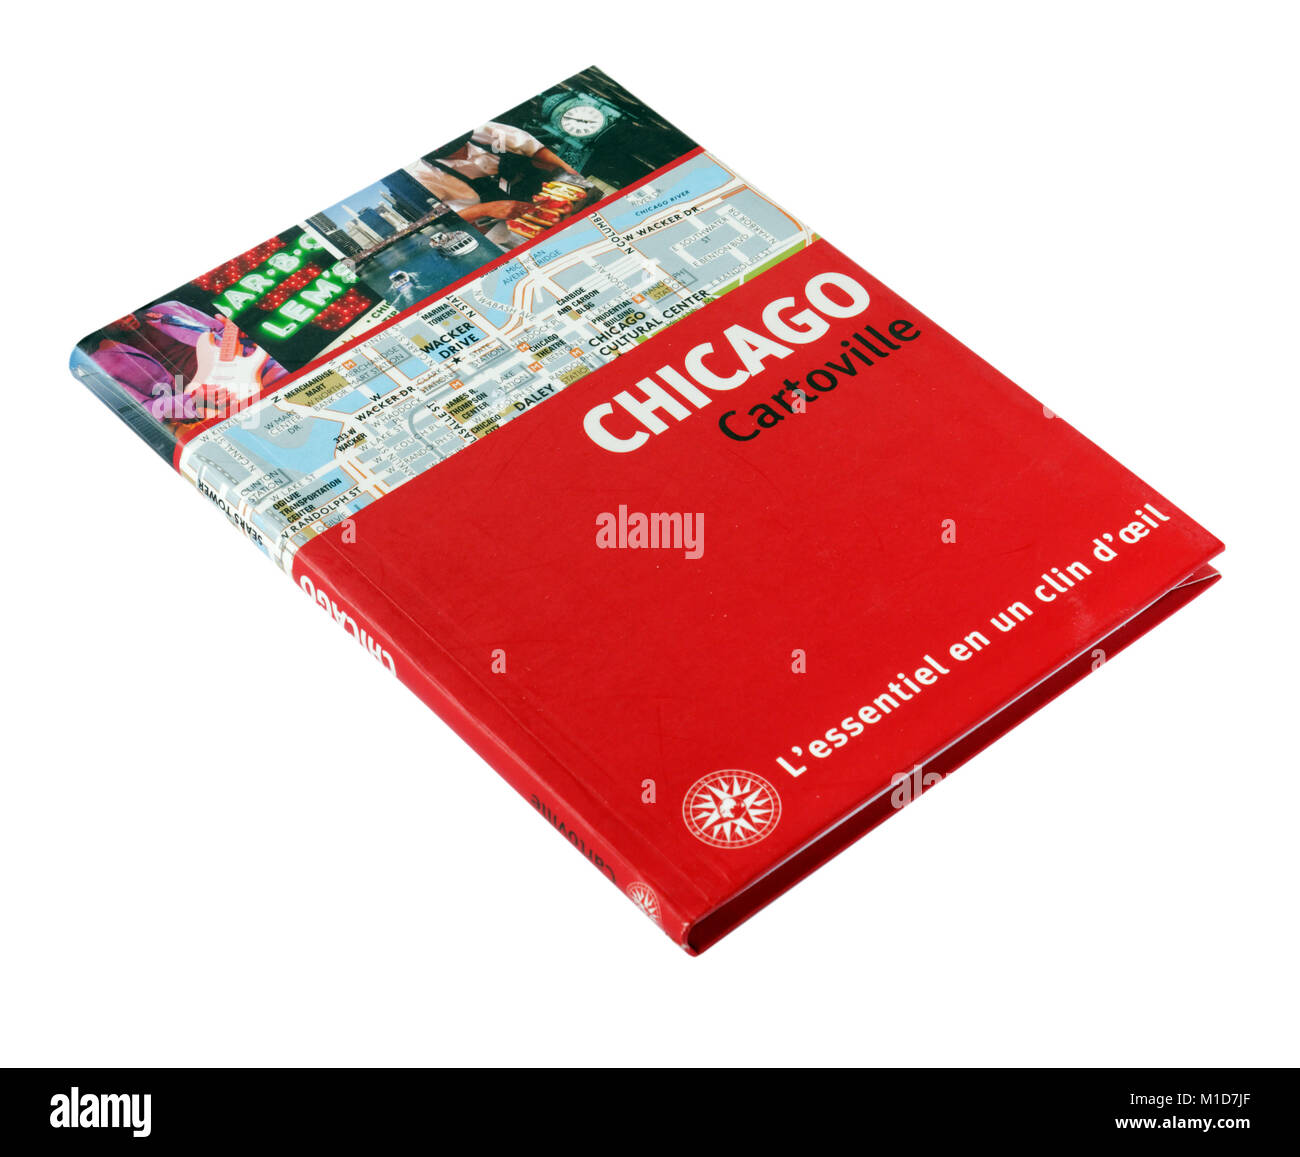 The Cartoville city guide to Chicago Stock Photo